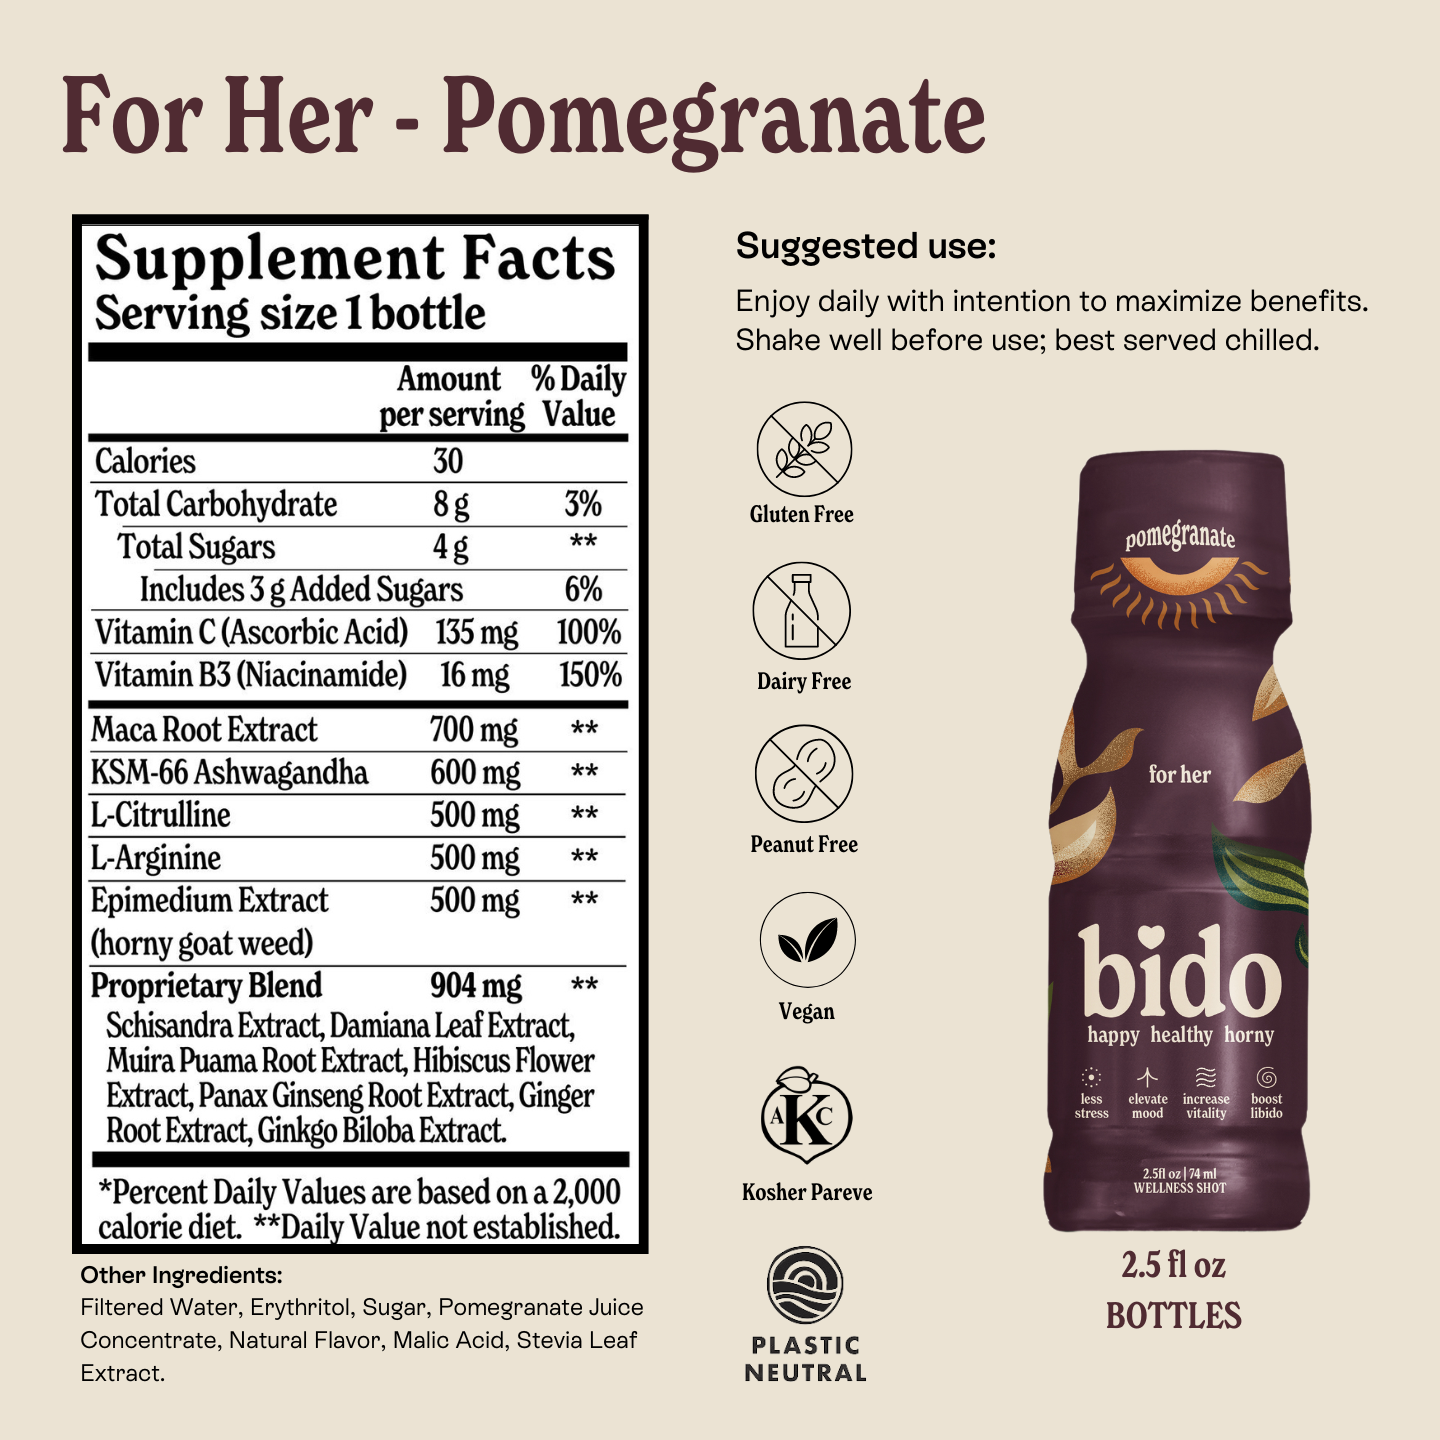 Label for a pomegranate dietary supplement with nutrition facts and certifications such as Gluten Free and Vegan.